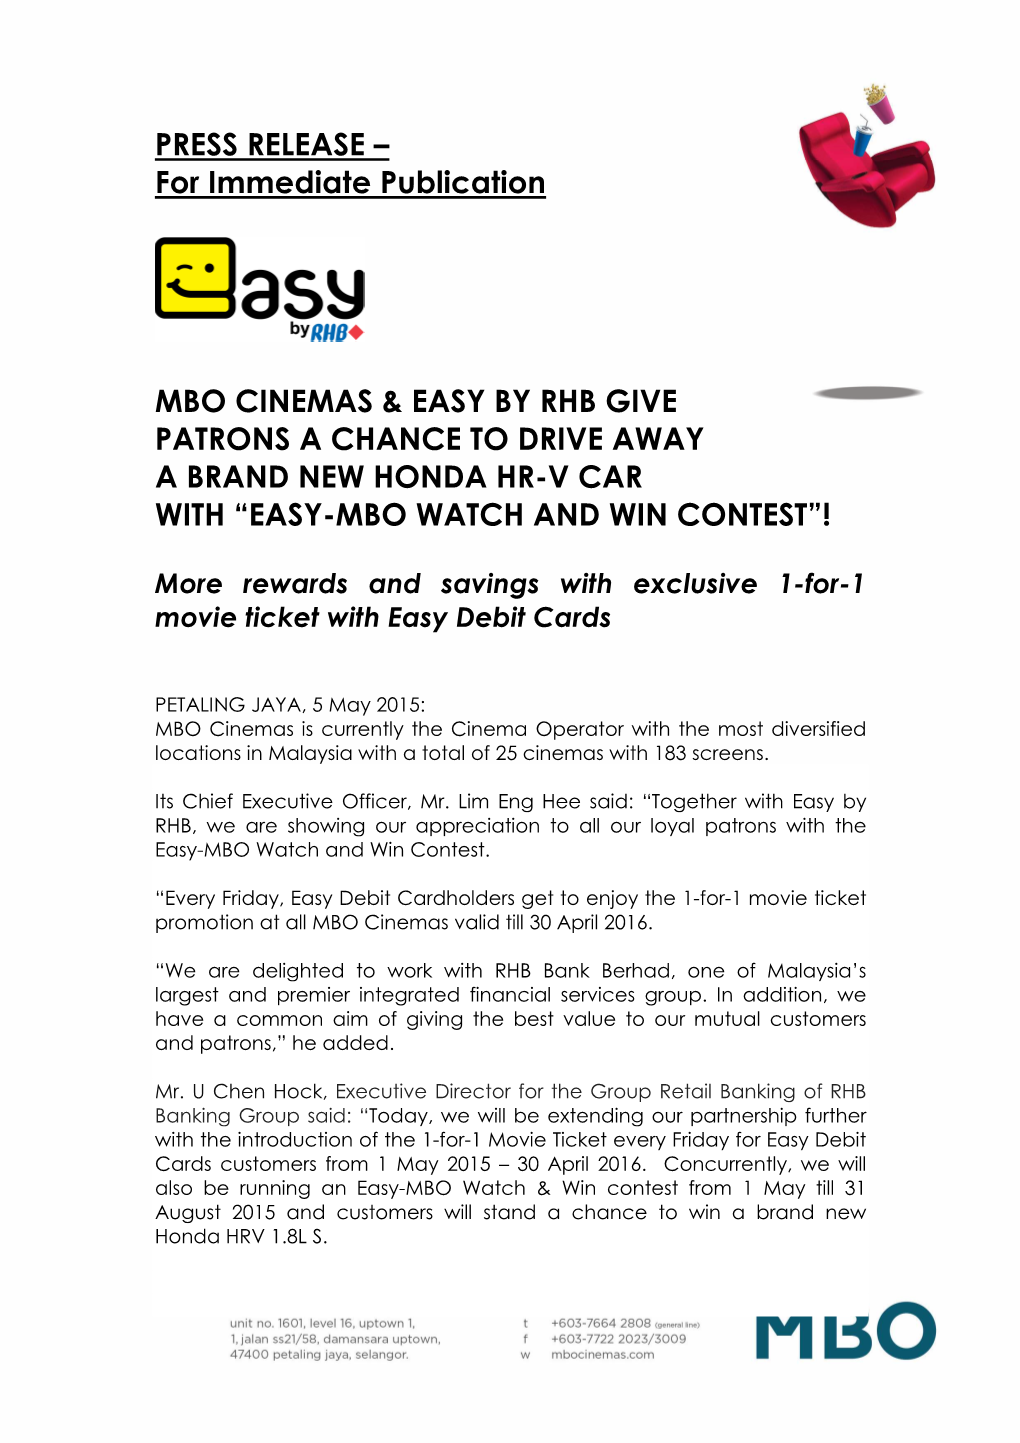 MBO Cinemas & Easy by RHB Give Patrons a Chance to Drive Away